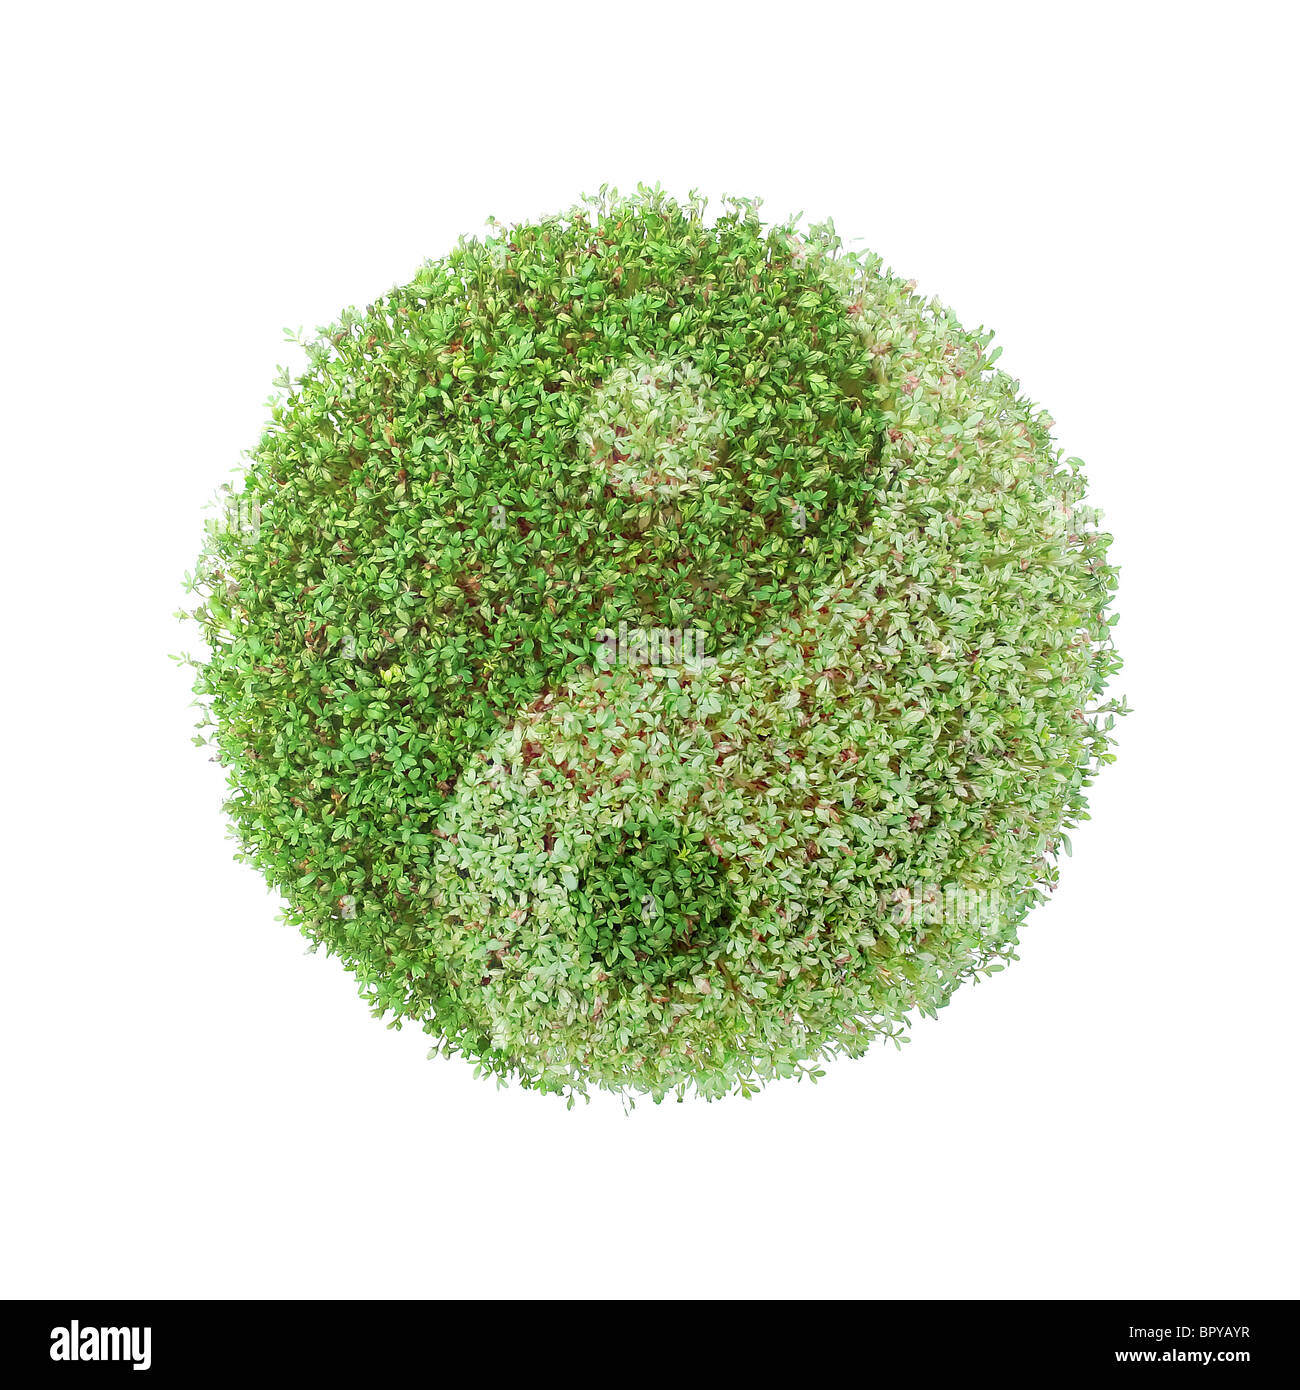 Green plant globe with superimposed ying-yang symbol over white background Stock Photo